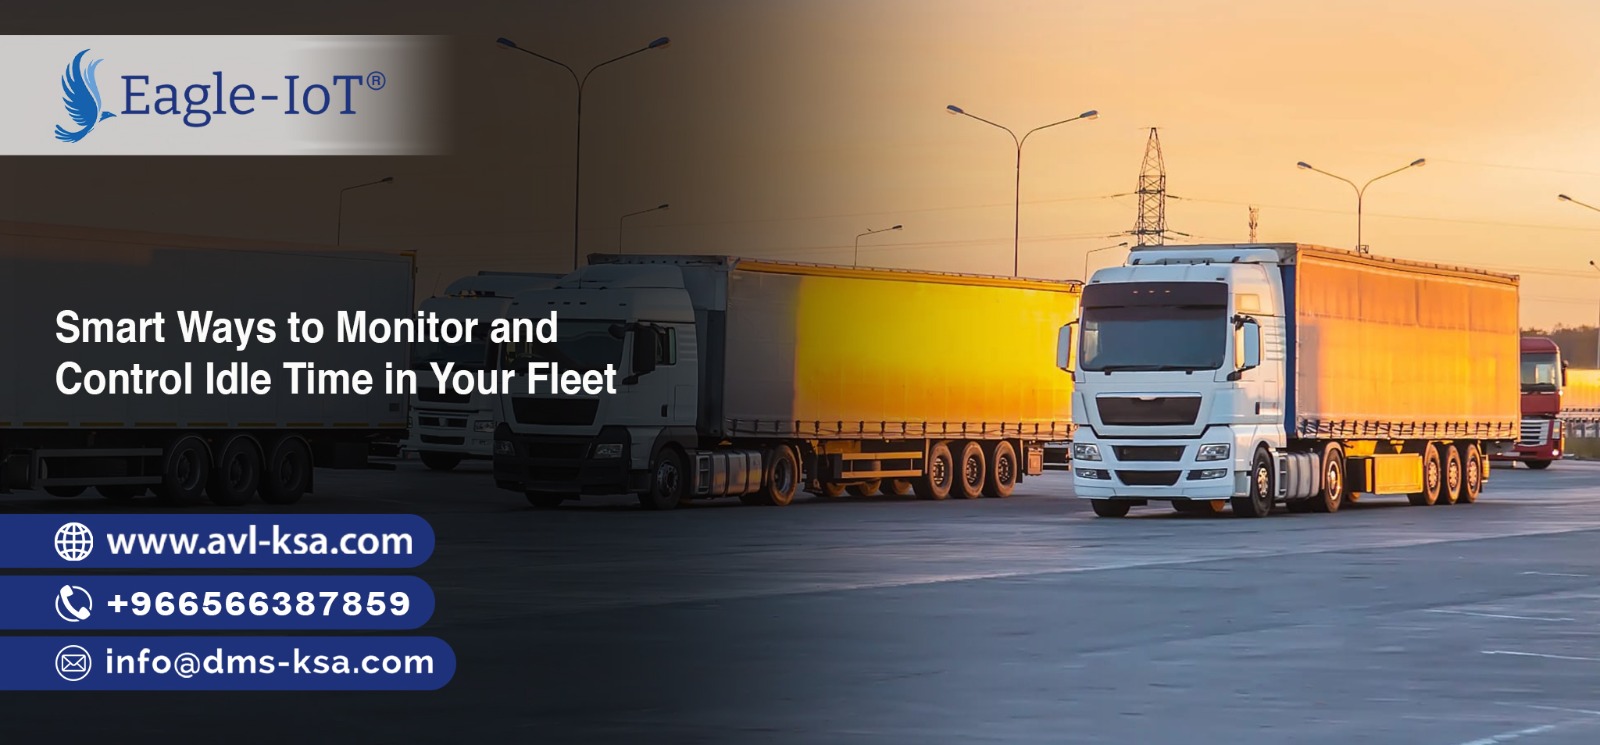 Smart Ways to Monitor and Control Idle Time in Your Fleet